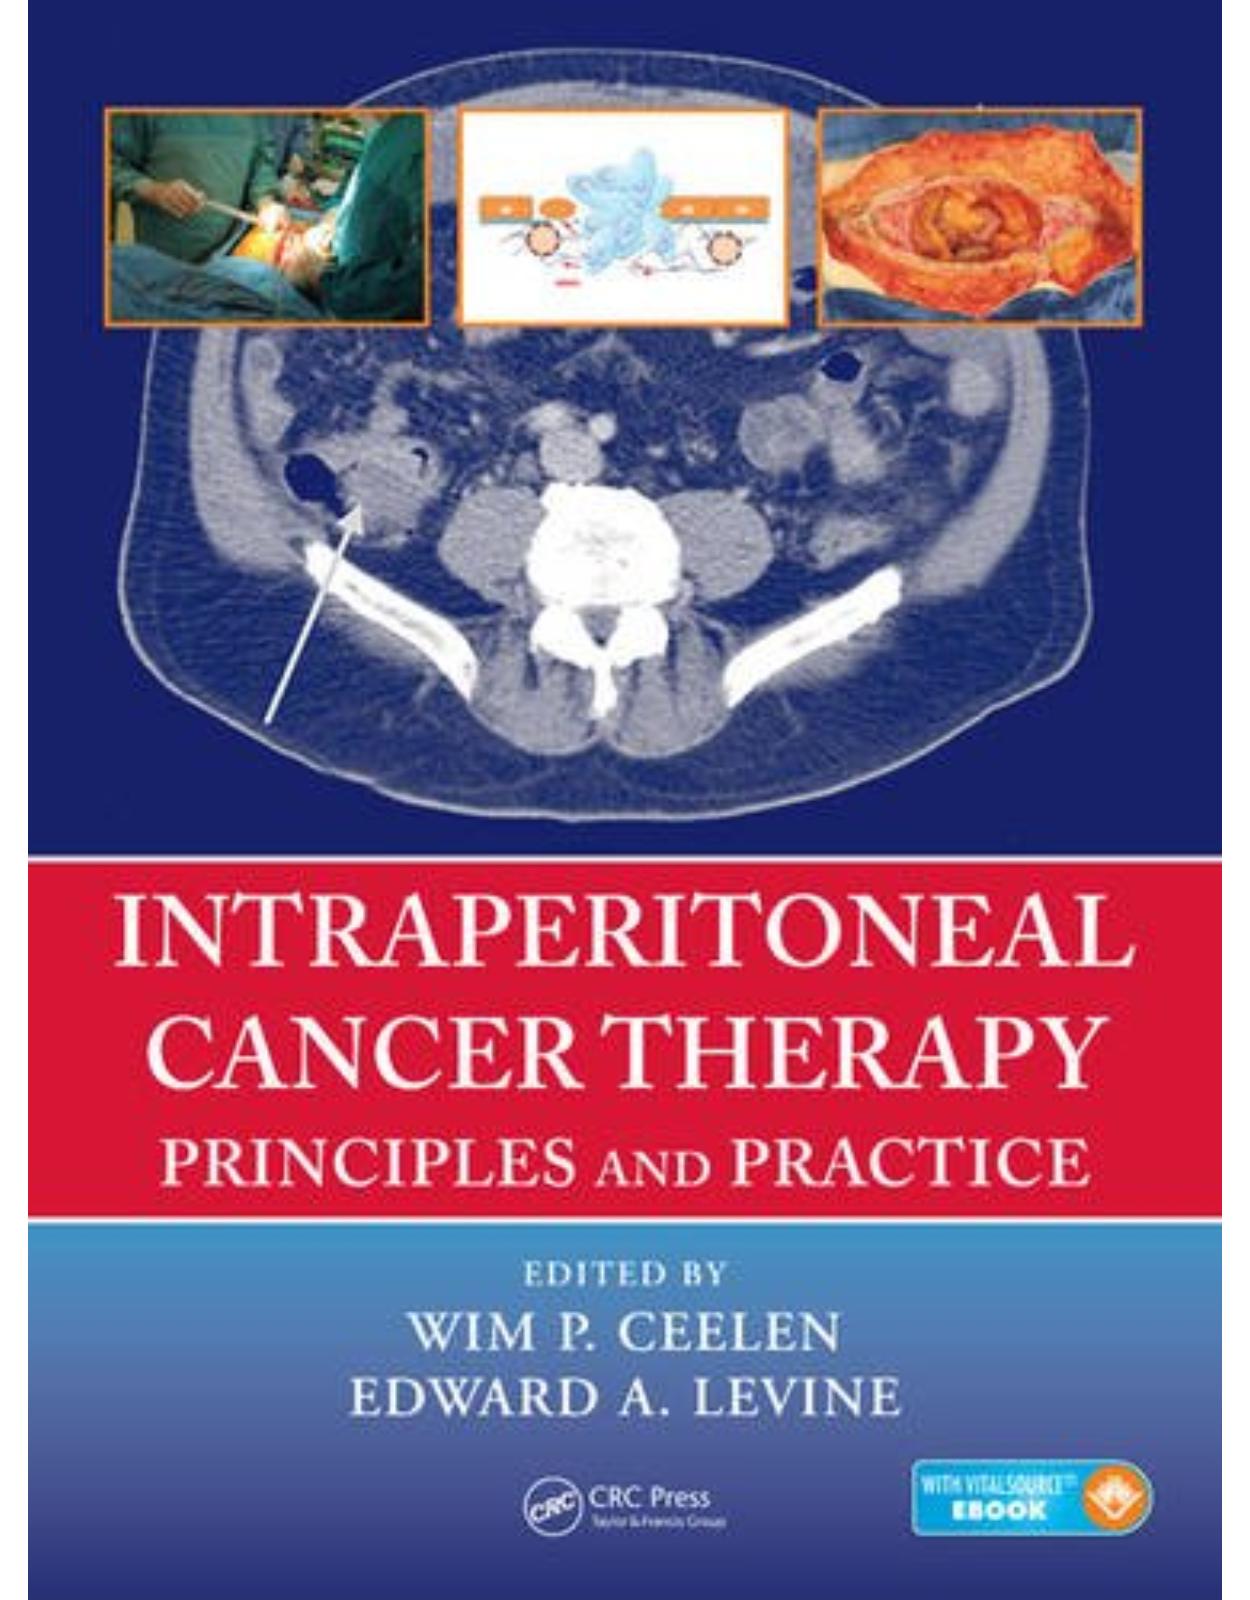 Intraperitoneal Cancer Therapy: Principles and Practice